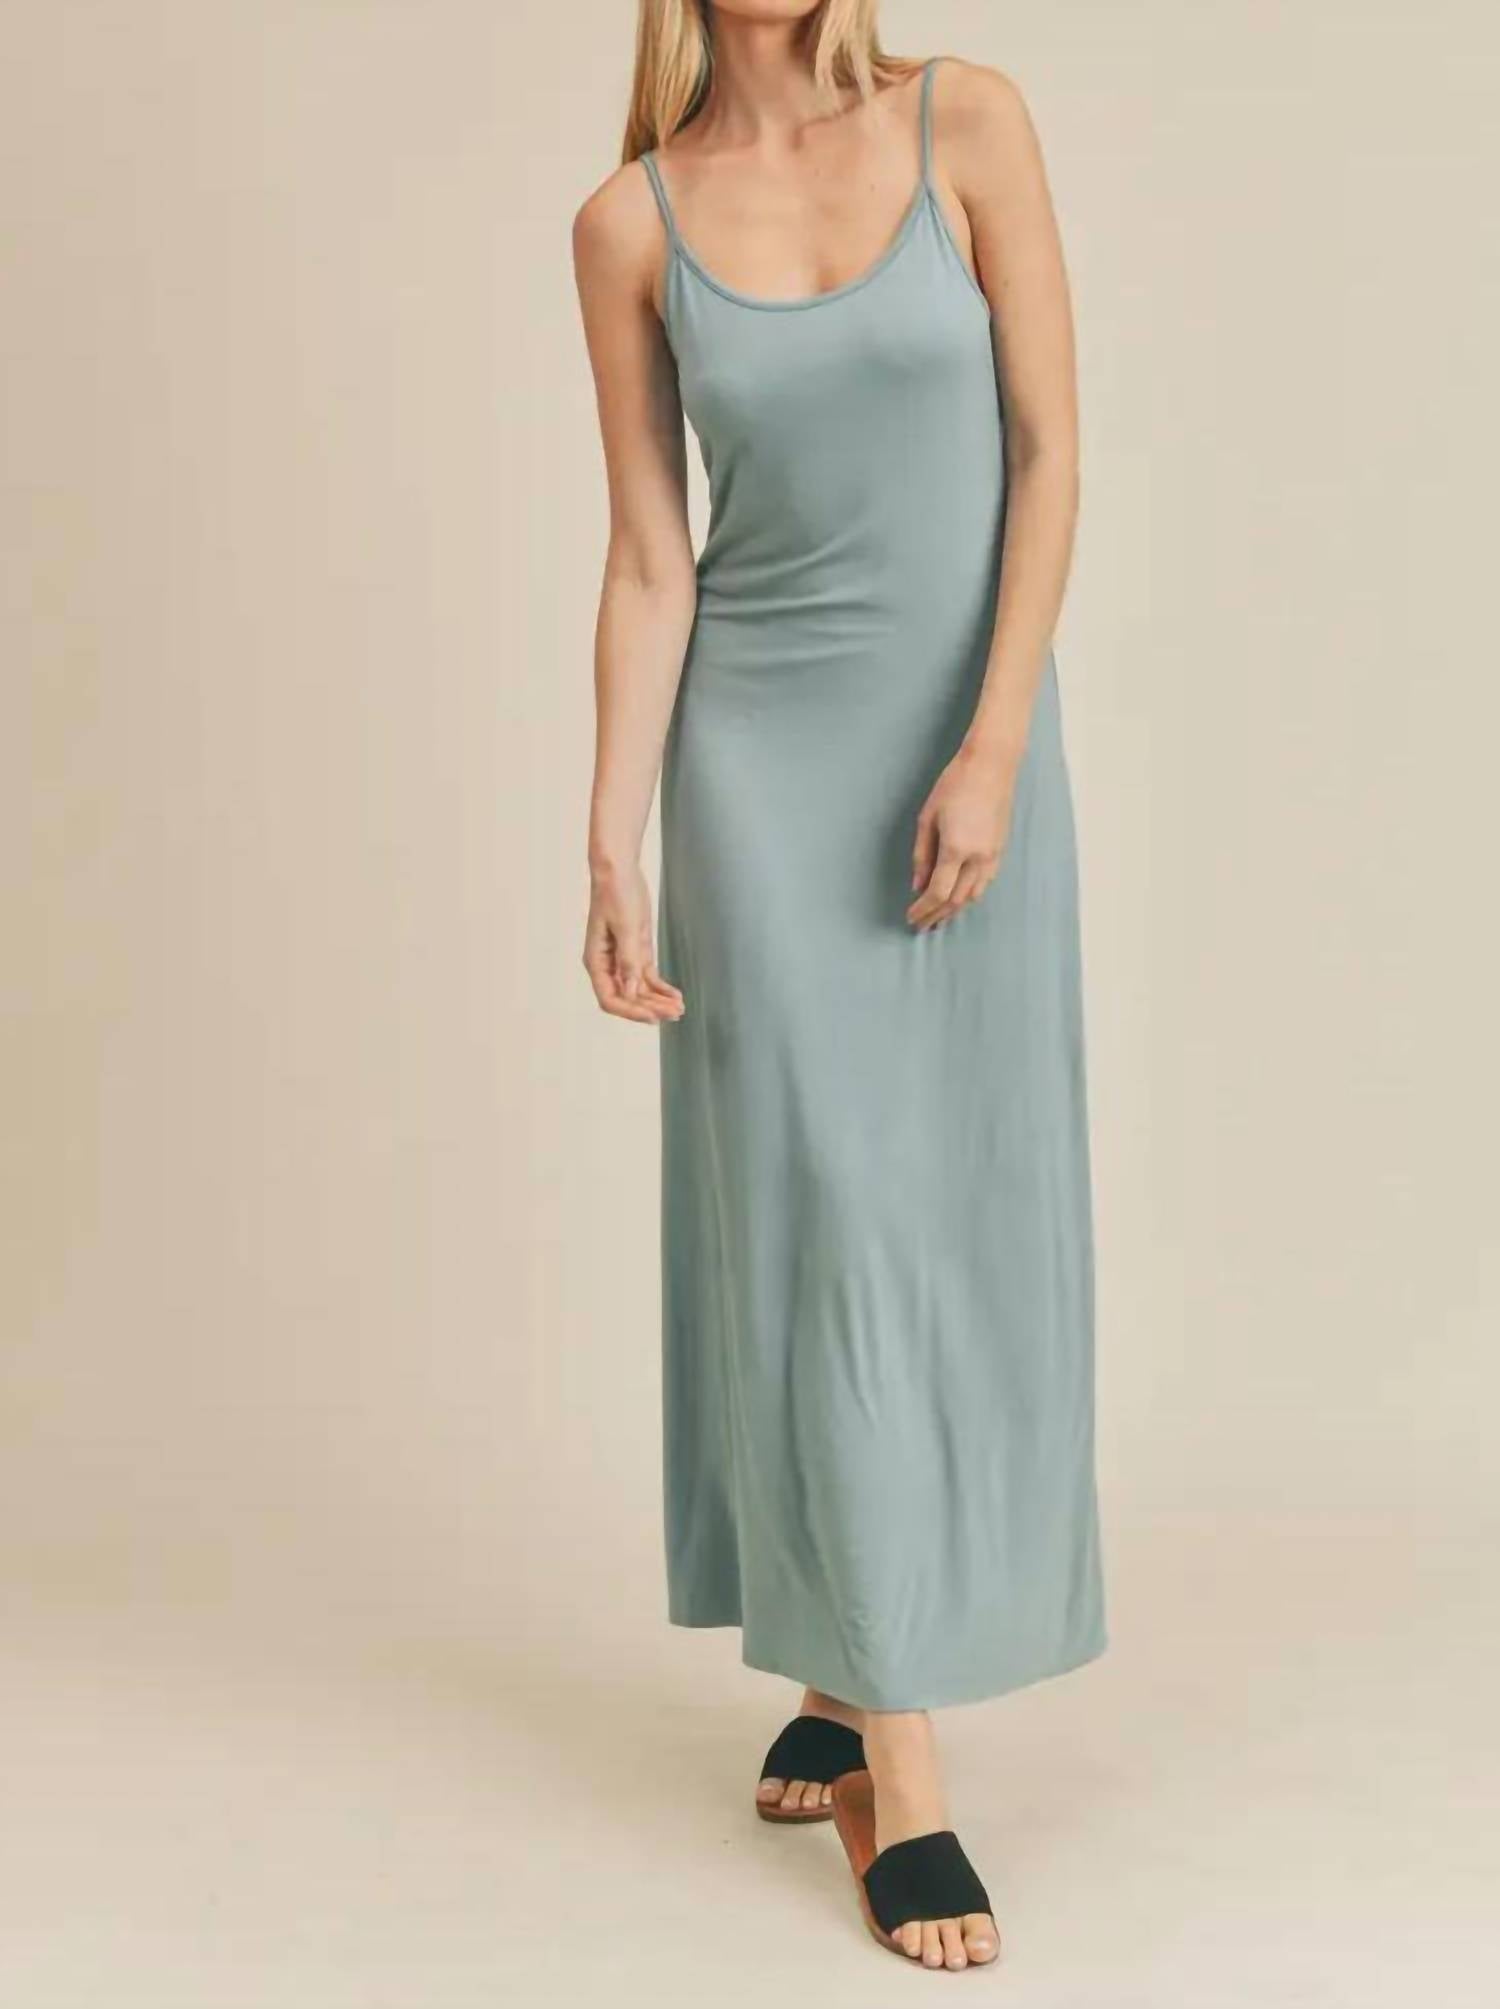 Wasabi + Mint - Modal Strappy Open Back Maxi Dress with Lining